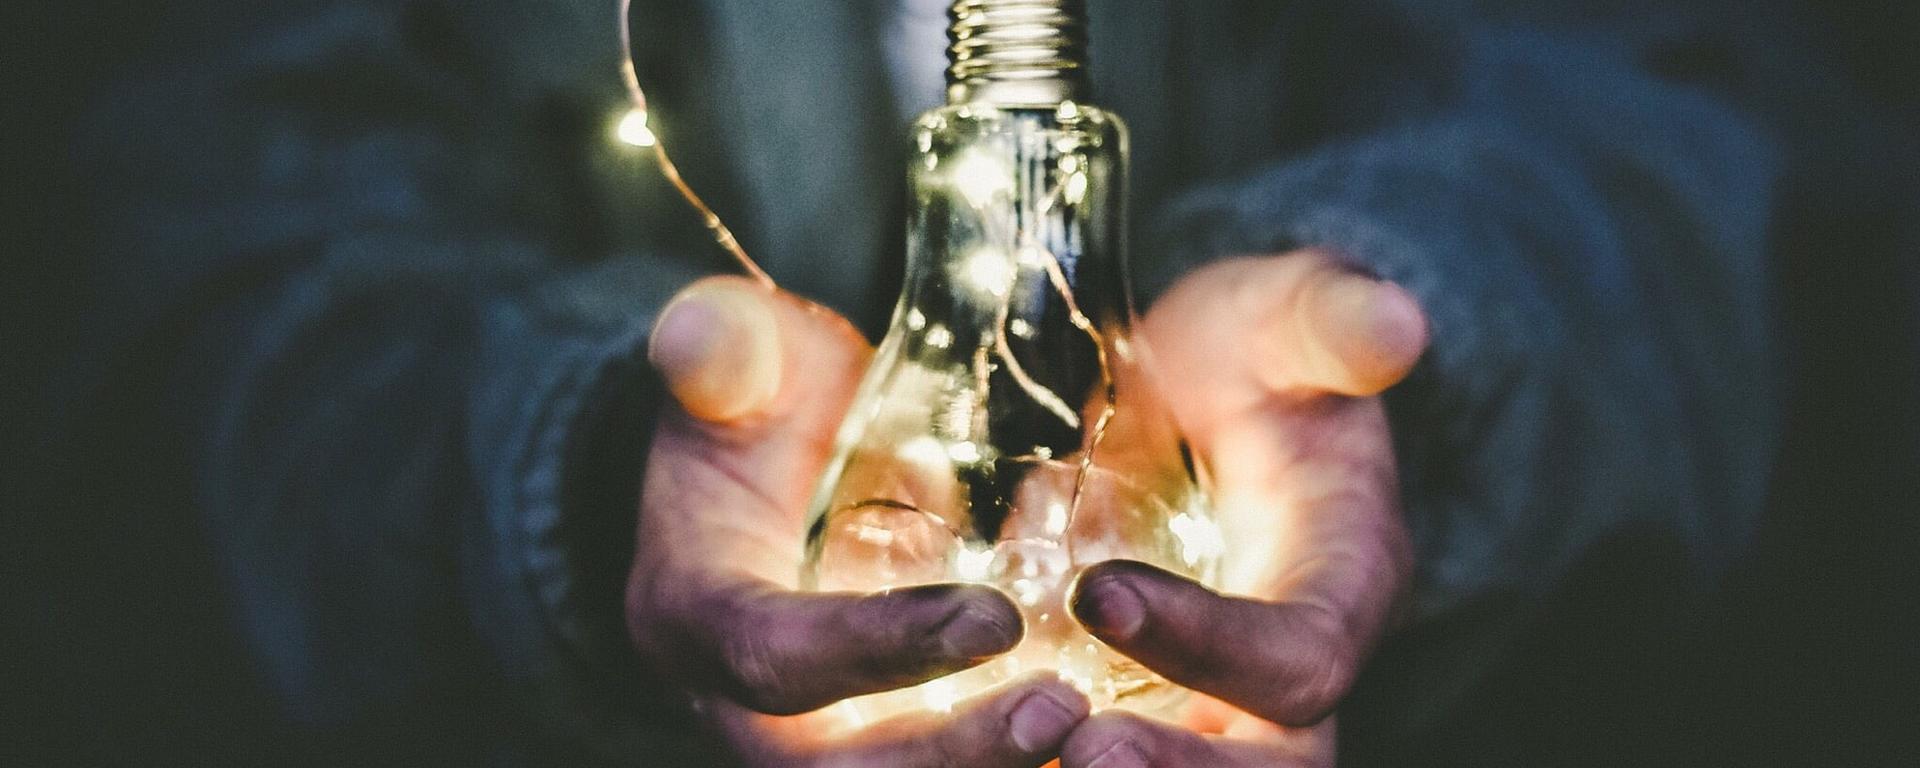 A pair of hands holds a glowing lightbulb